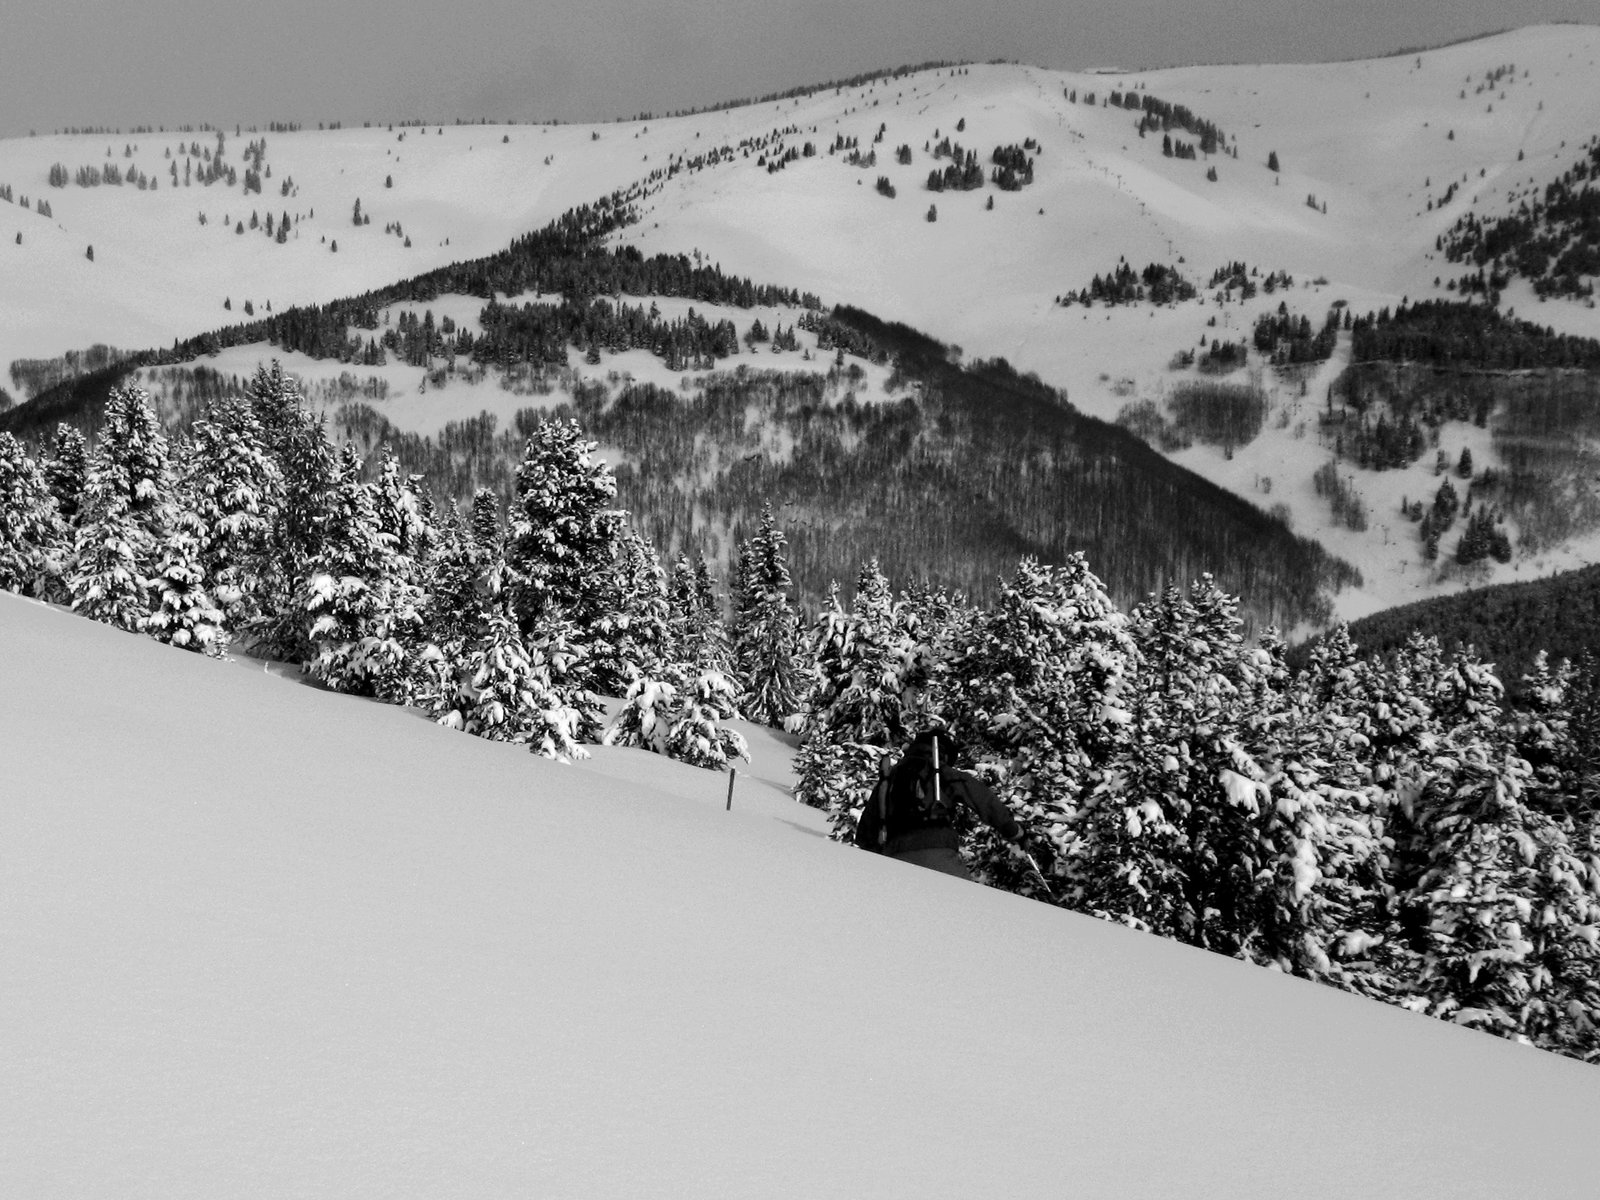 Dropping the cornice outside Earl's Bowl